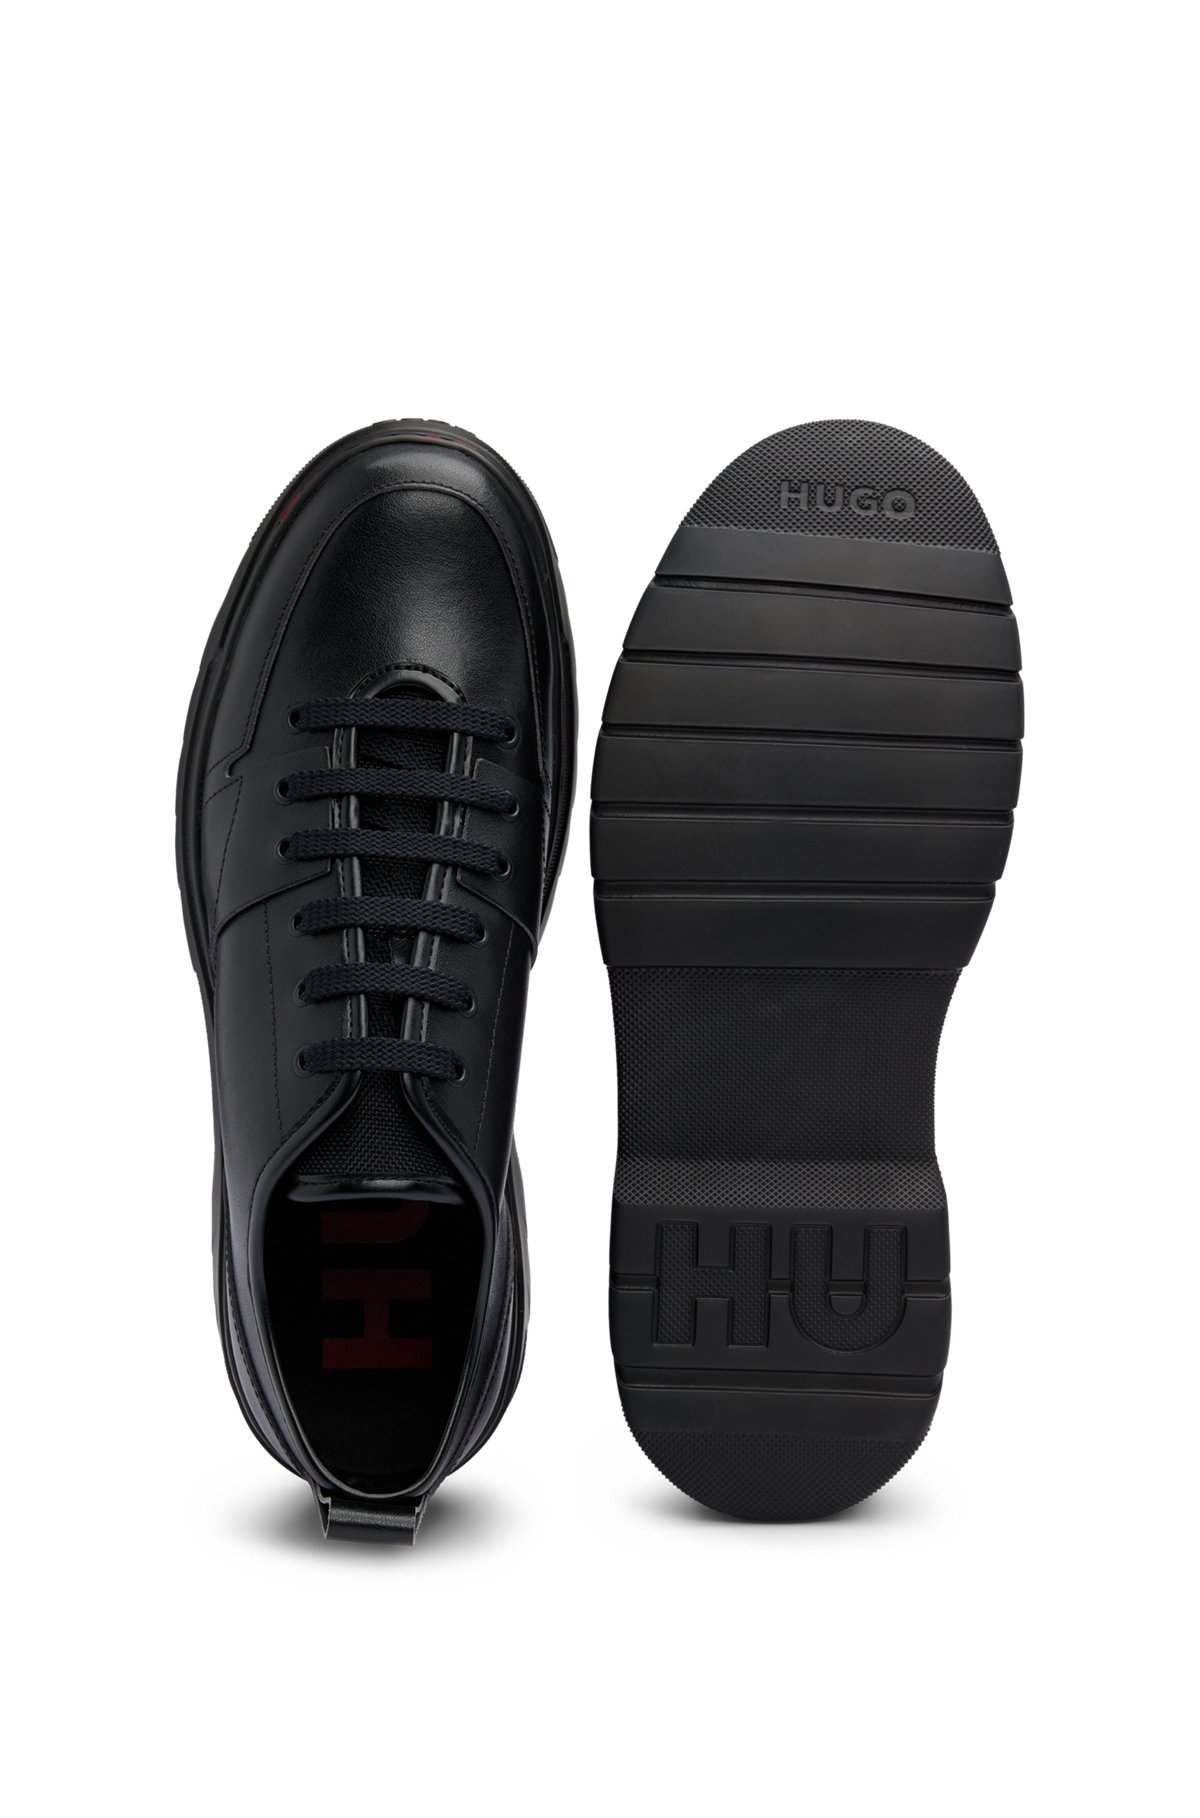 Leather Oxford shoes with stacked logo and EVA sole, Black